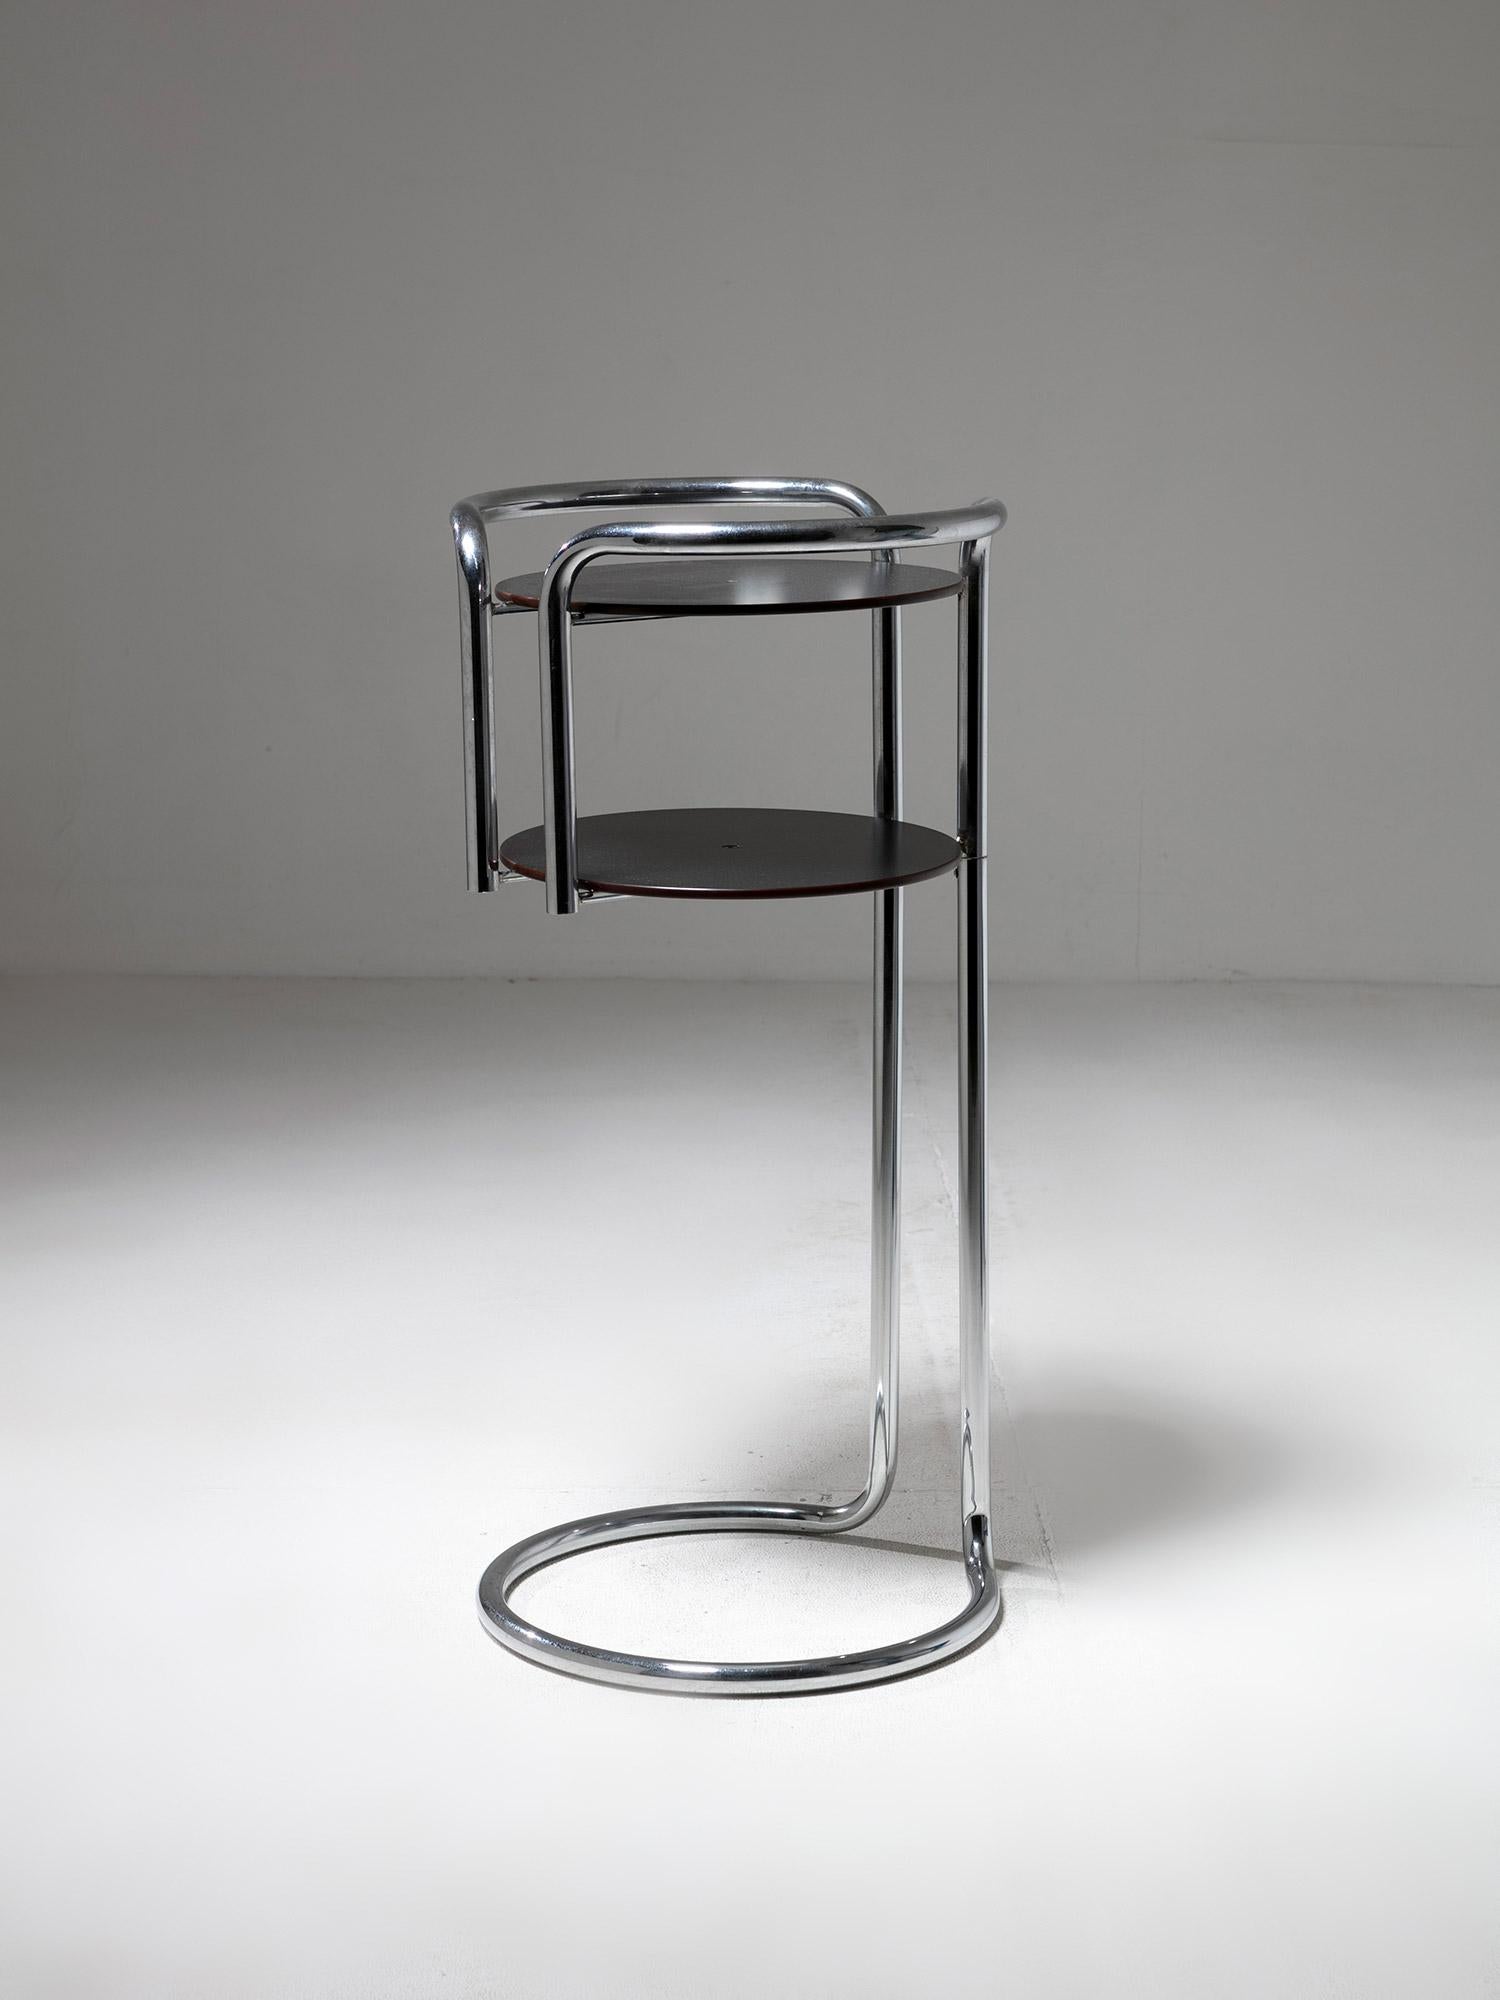 Object / telephone stand by Gino Levi Montalcini and Giuseppe Pagano Pogatchnig for Zanotta.
Chrome tubes support two double sided b/w round plates.
A versatile object no longer needed to host a telephone with its directory. 